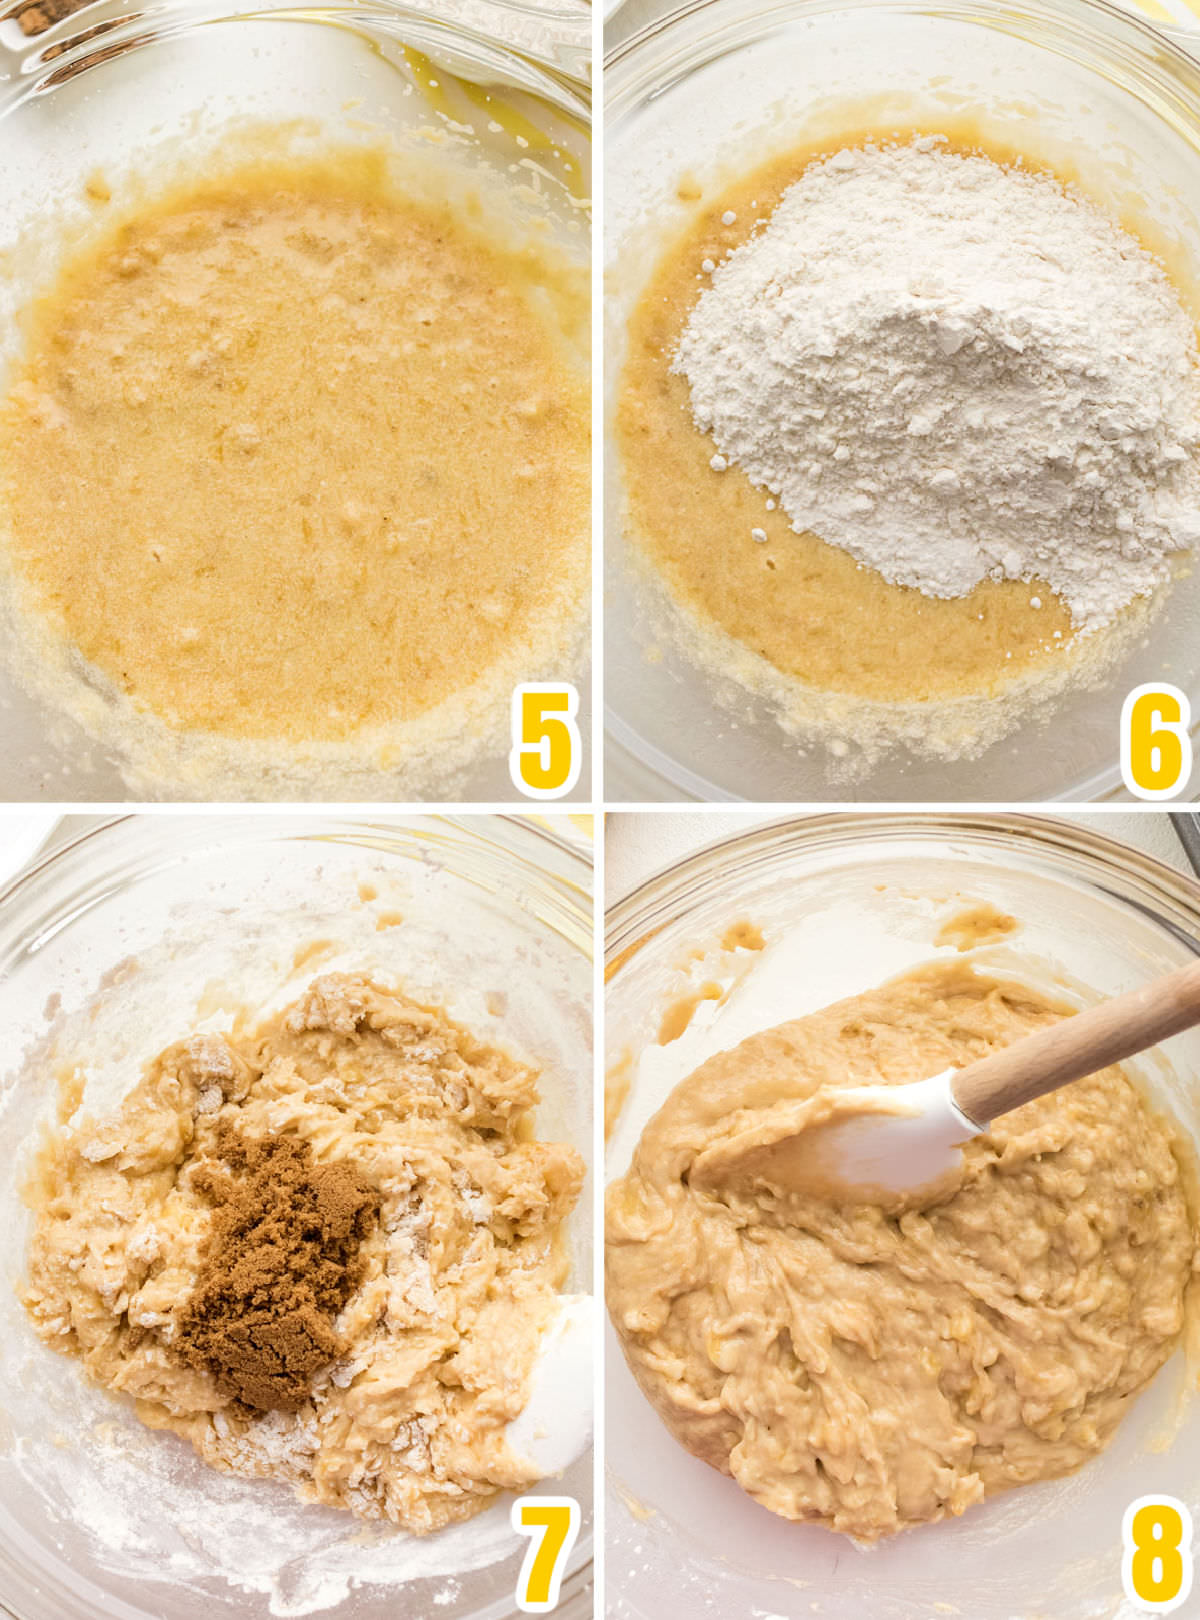 Collage image showing how to mix the wet ingredients with the dry ingredients for the Banana Bread batter.